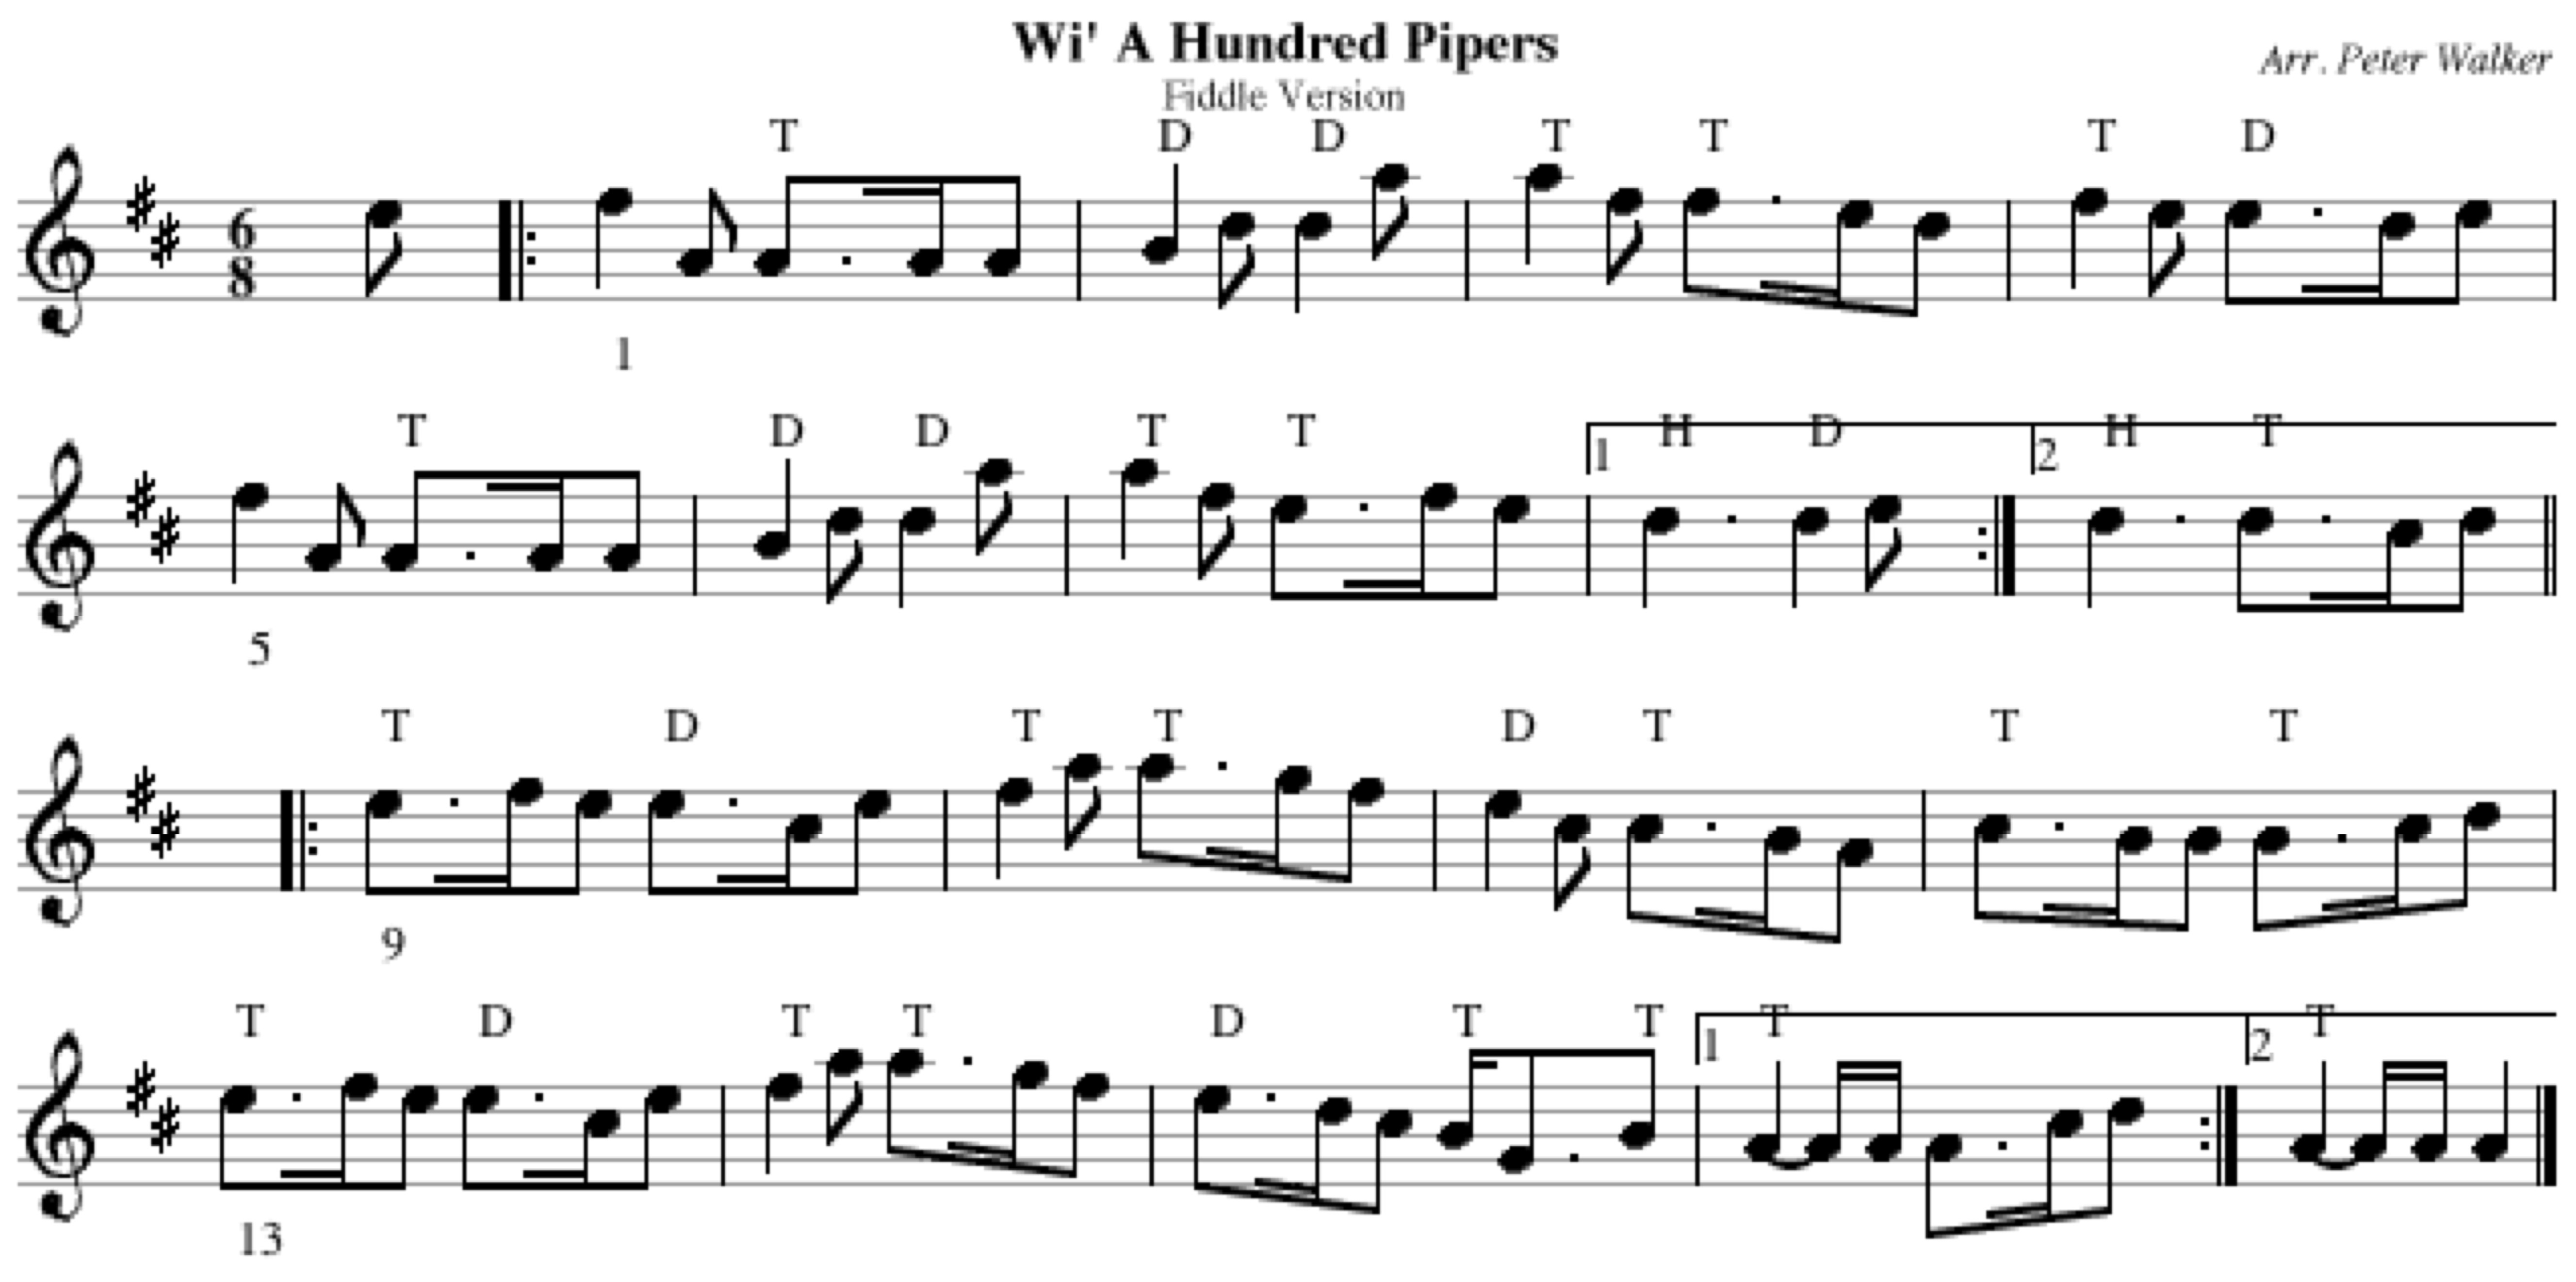 Simple Jigs For Beginner Pipers 